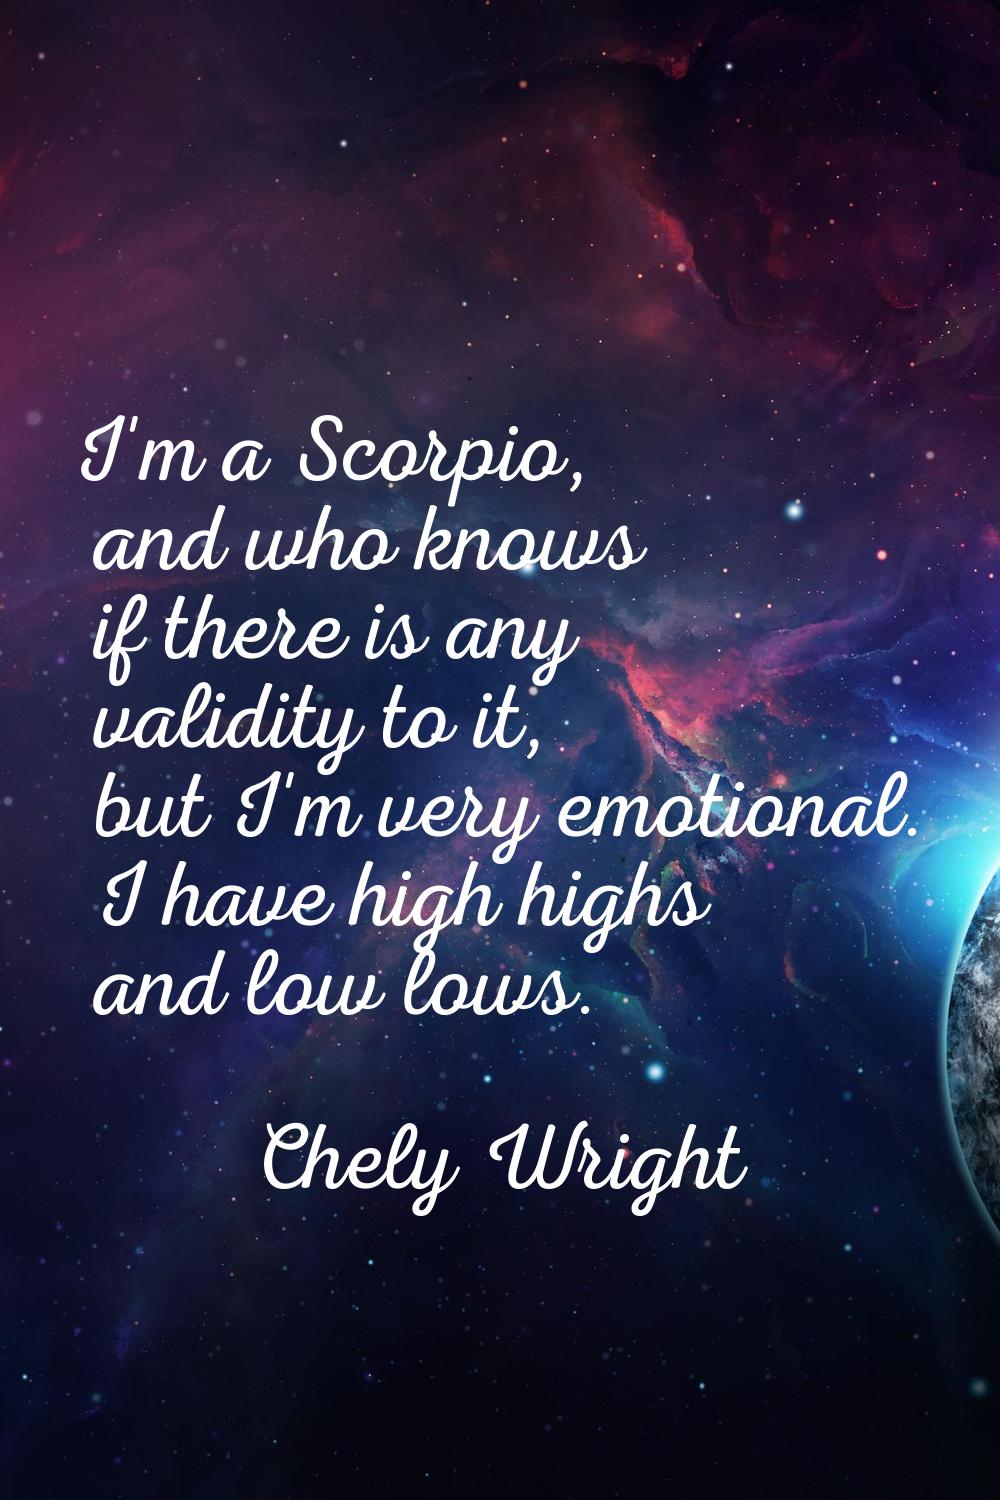 I'm a Scorpio, and who knows if there is any validity to it, but I'm very emotional. I have high hi